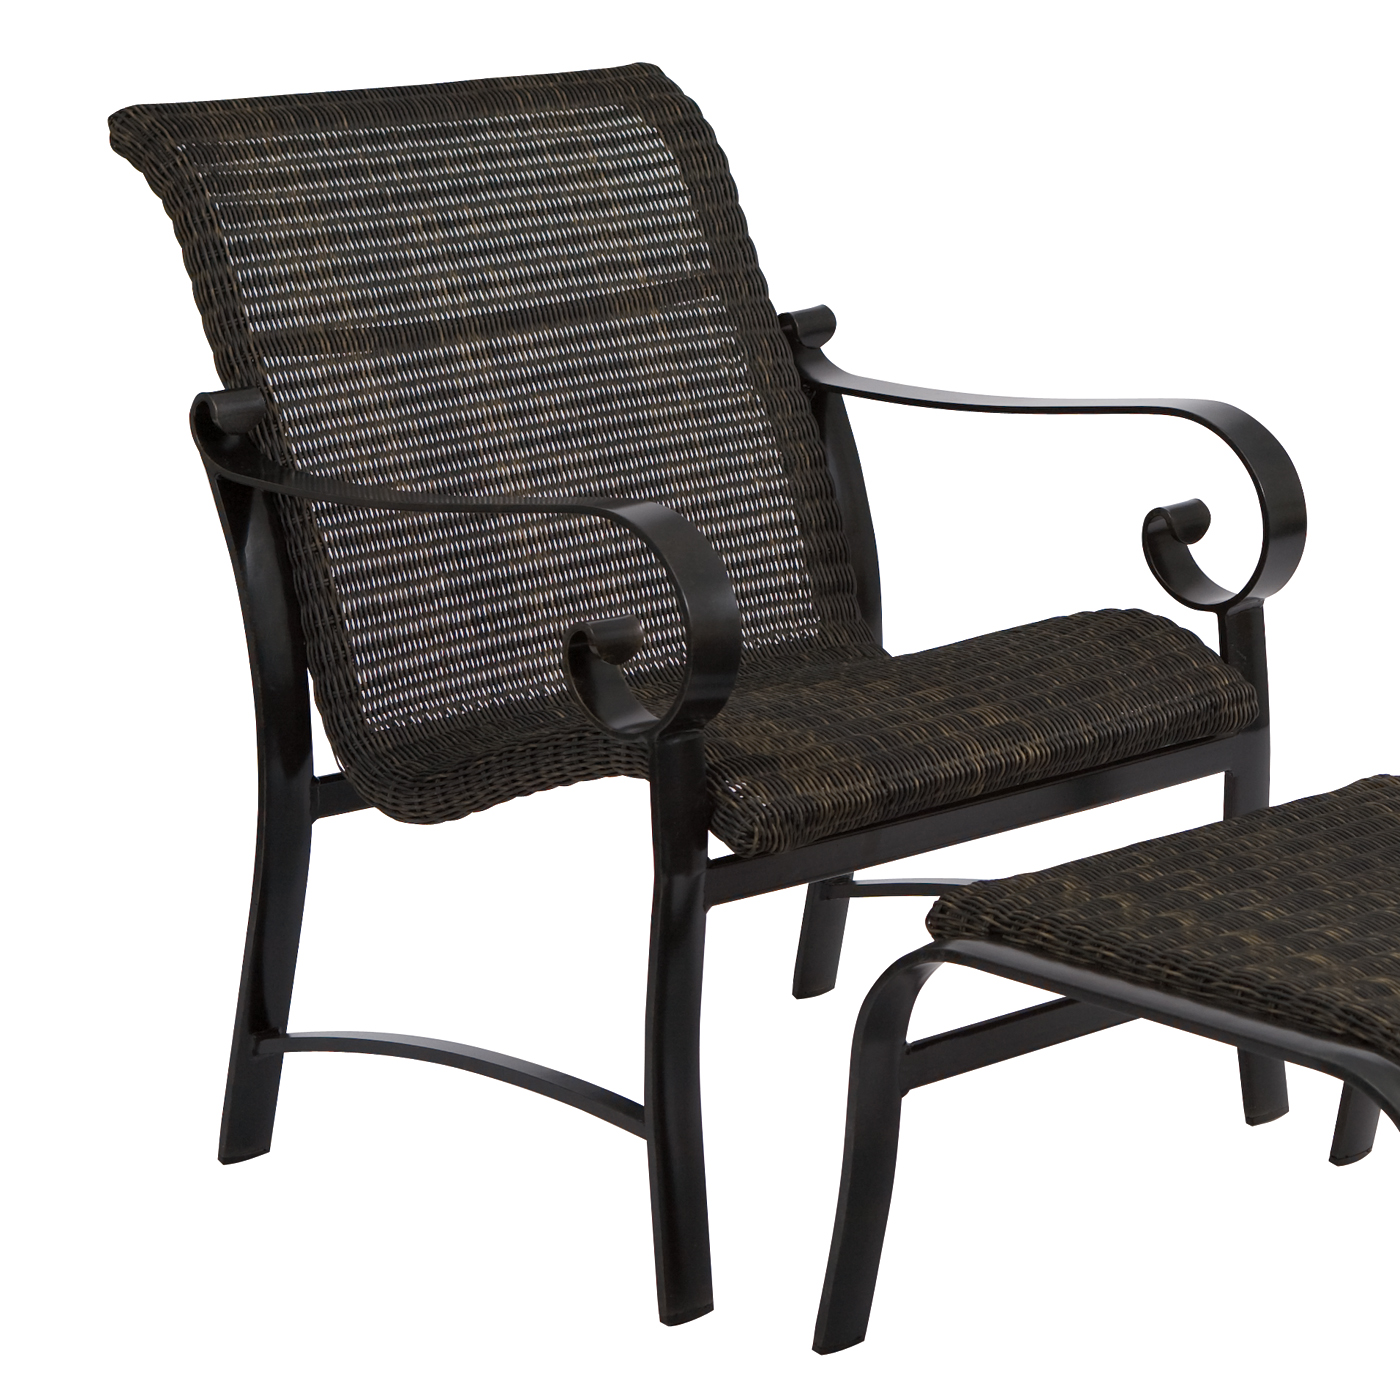 Round Lounge Chair Outdoor | The Best Chair Review Blog